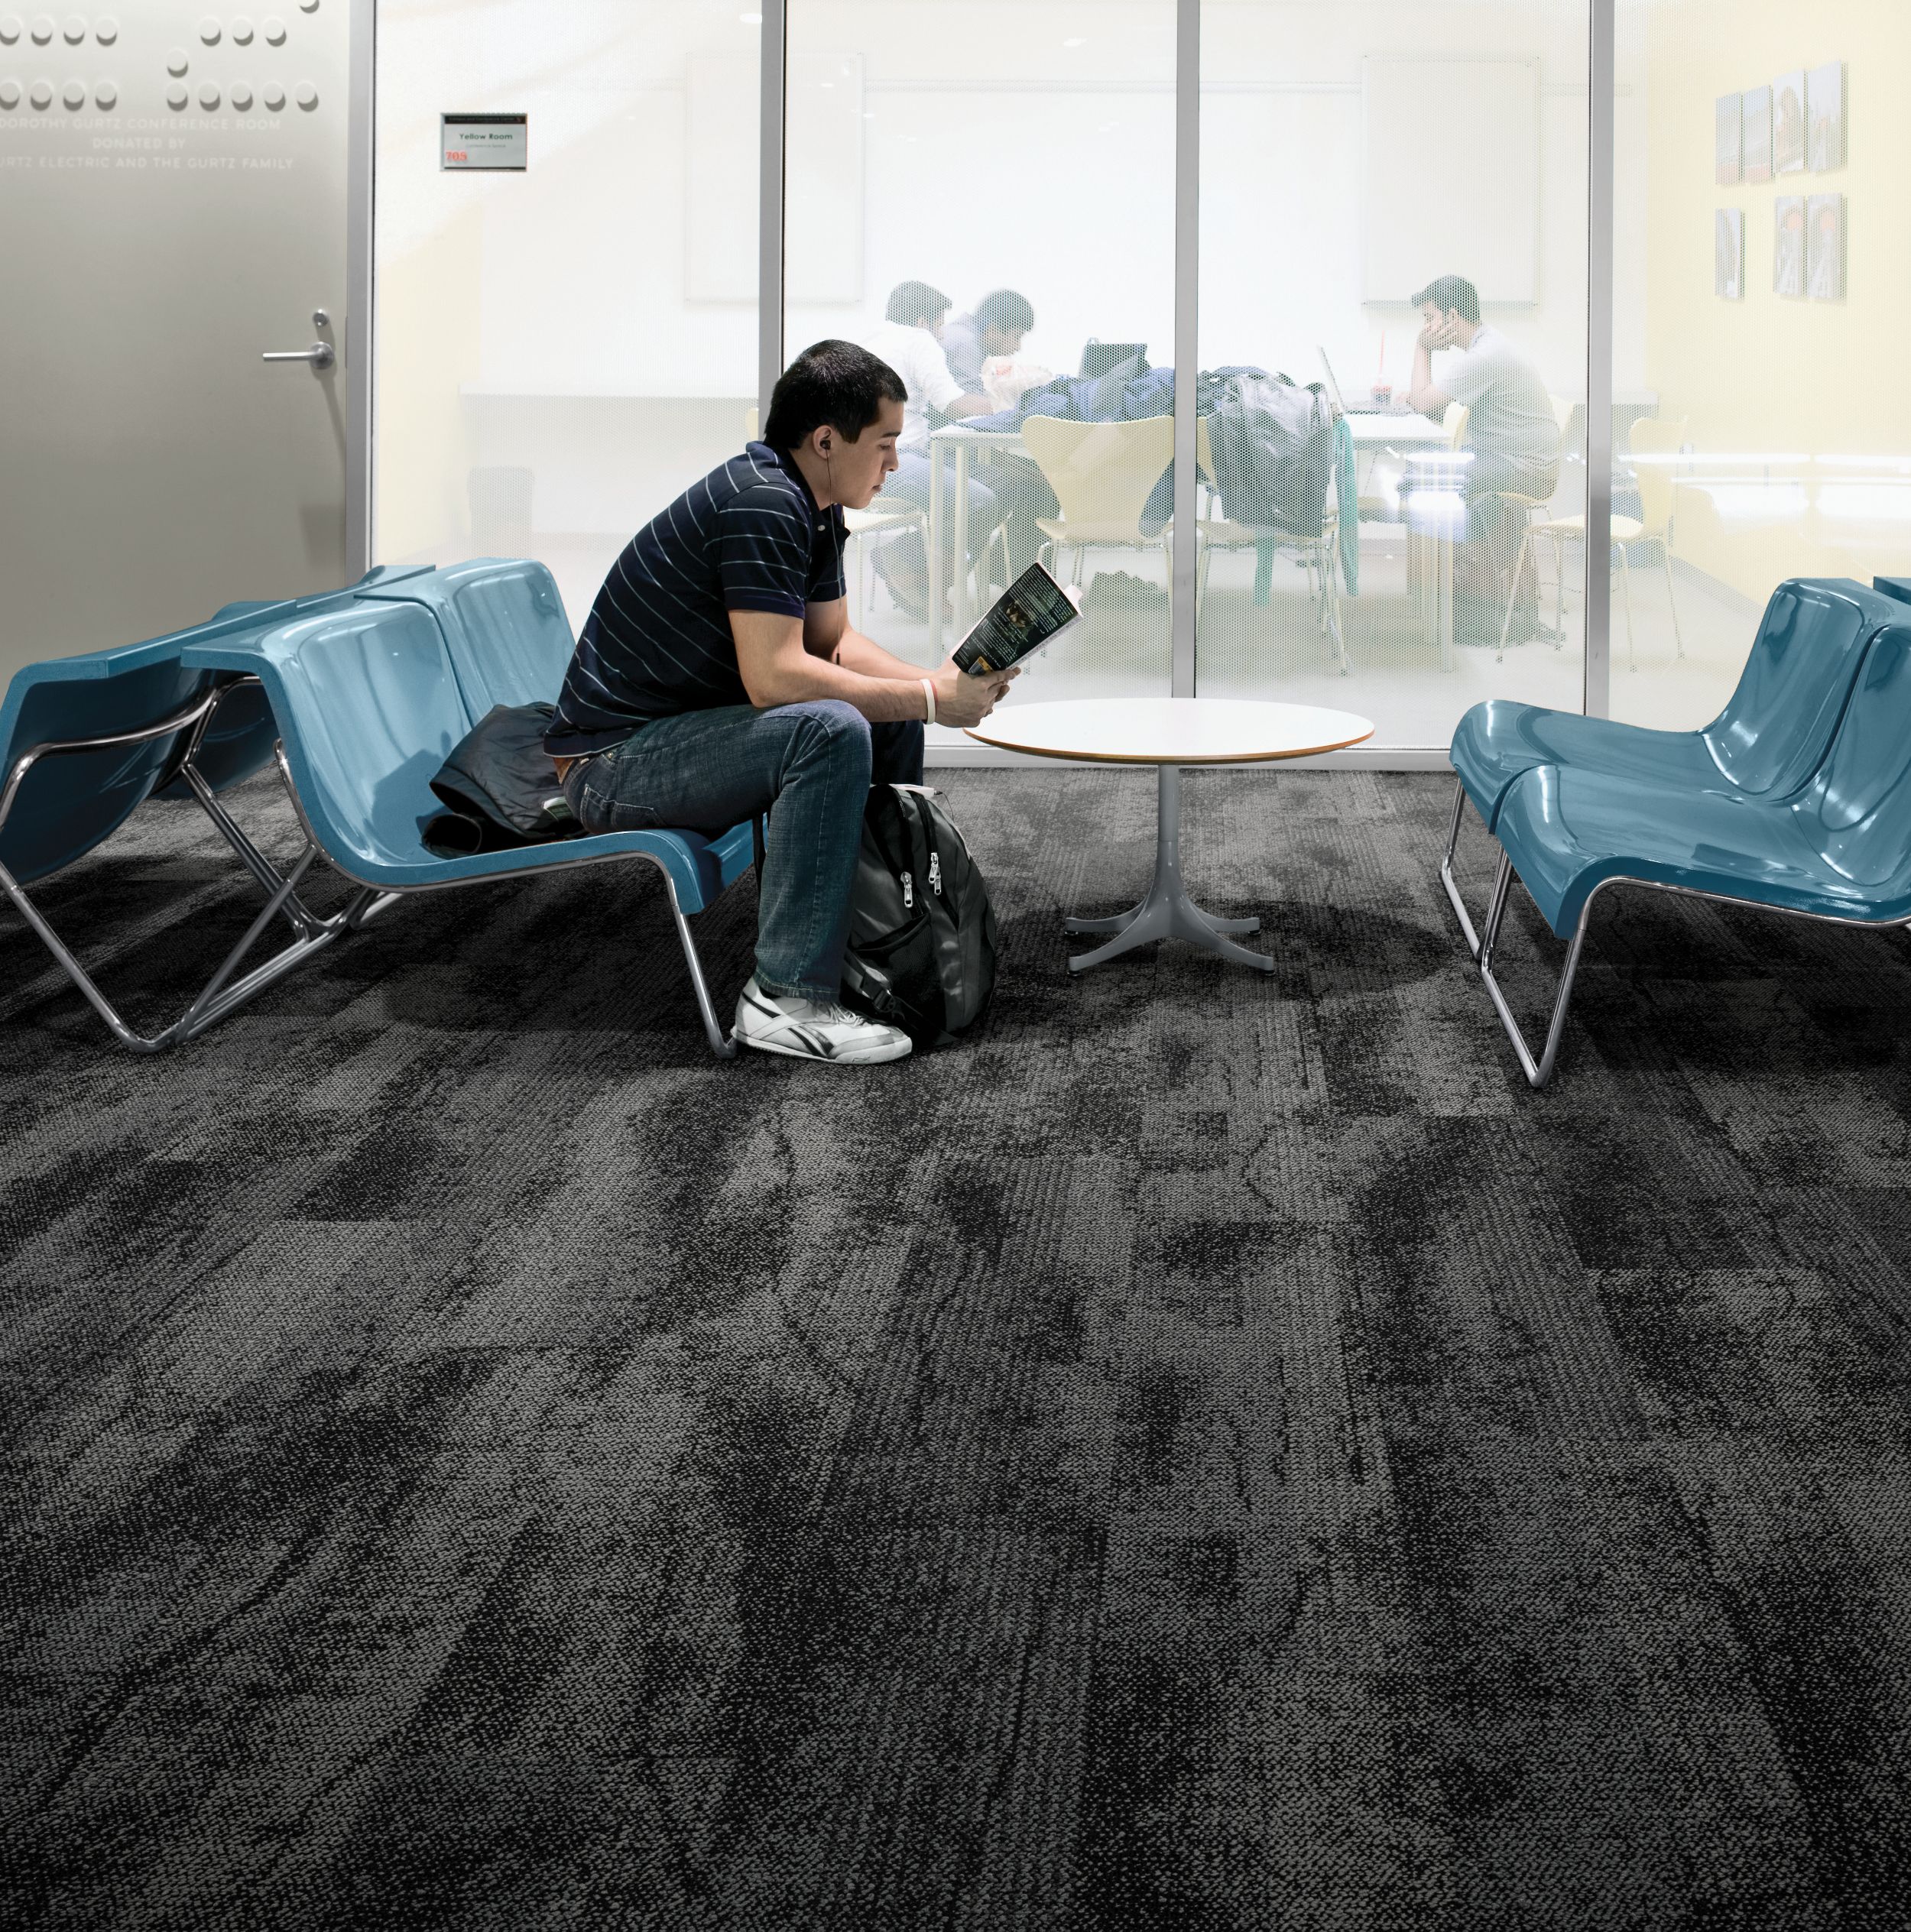 Interface Neighborhood Smooth plank carpet tile in public education space with man reading a book on blue chair imagen número 2